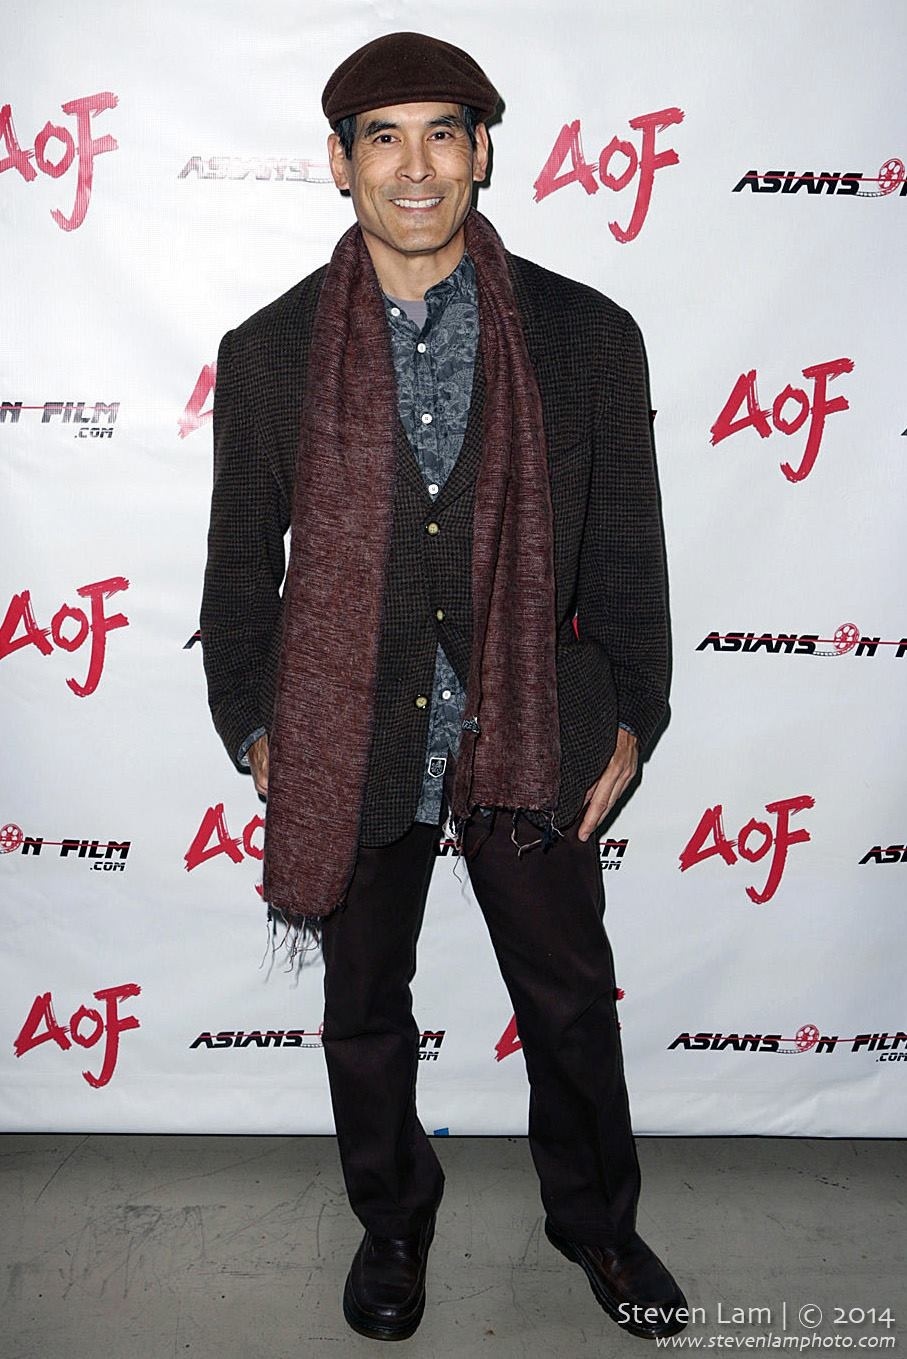 Best of Asians On Film Festival at the HollyShorts Monthly Screenings, LA - January 30, 2014; TCL Chinese Theatre, Hollywood